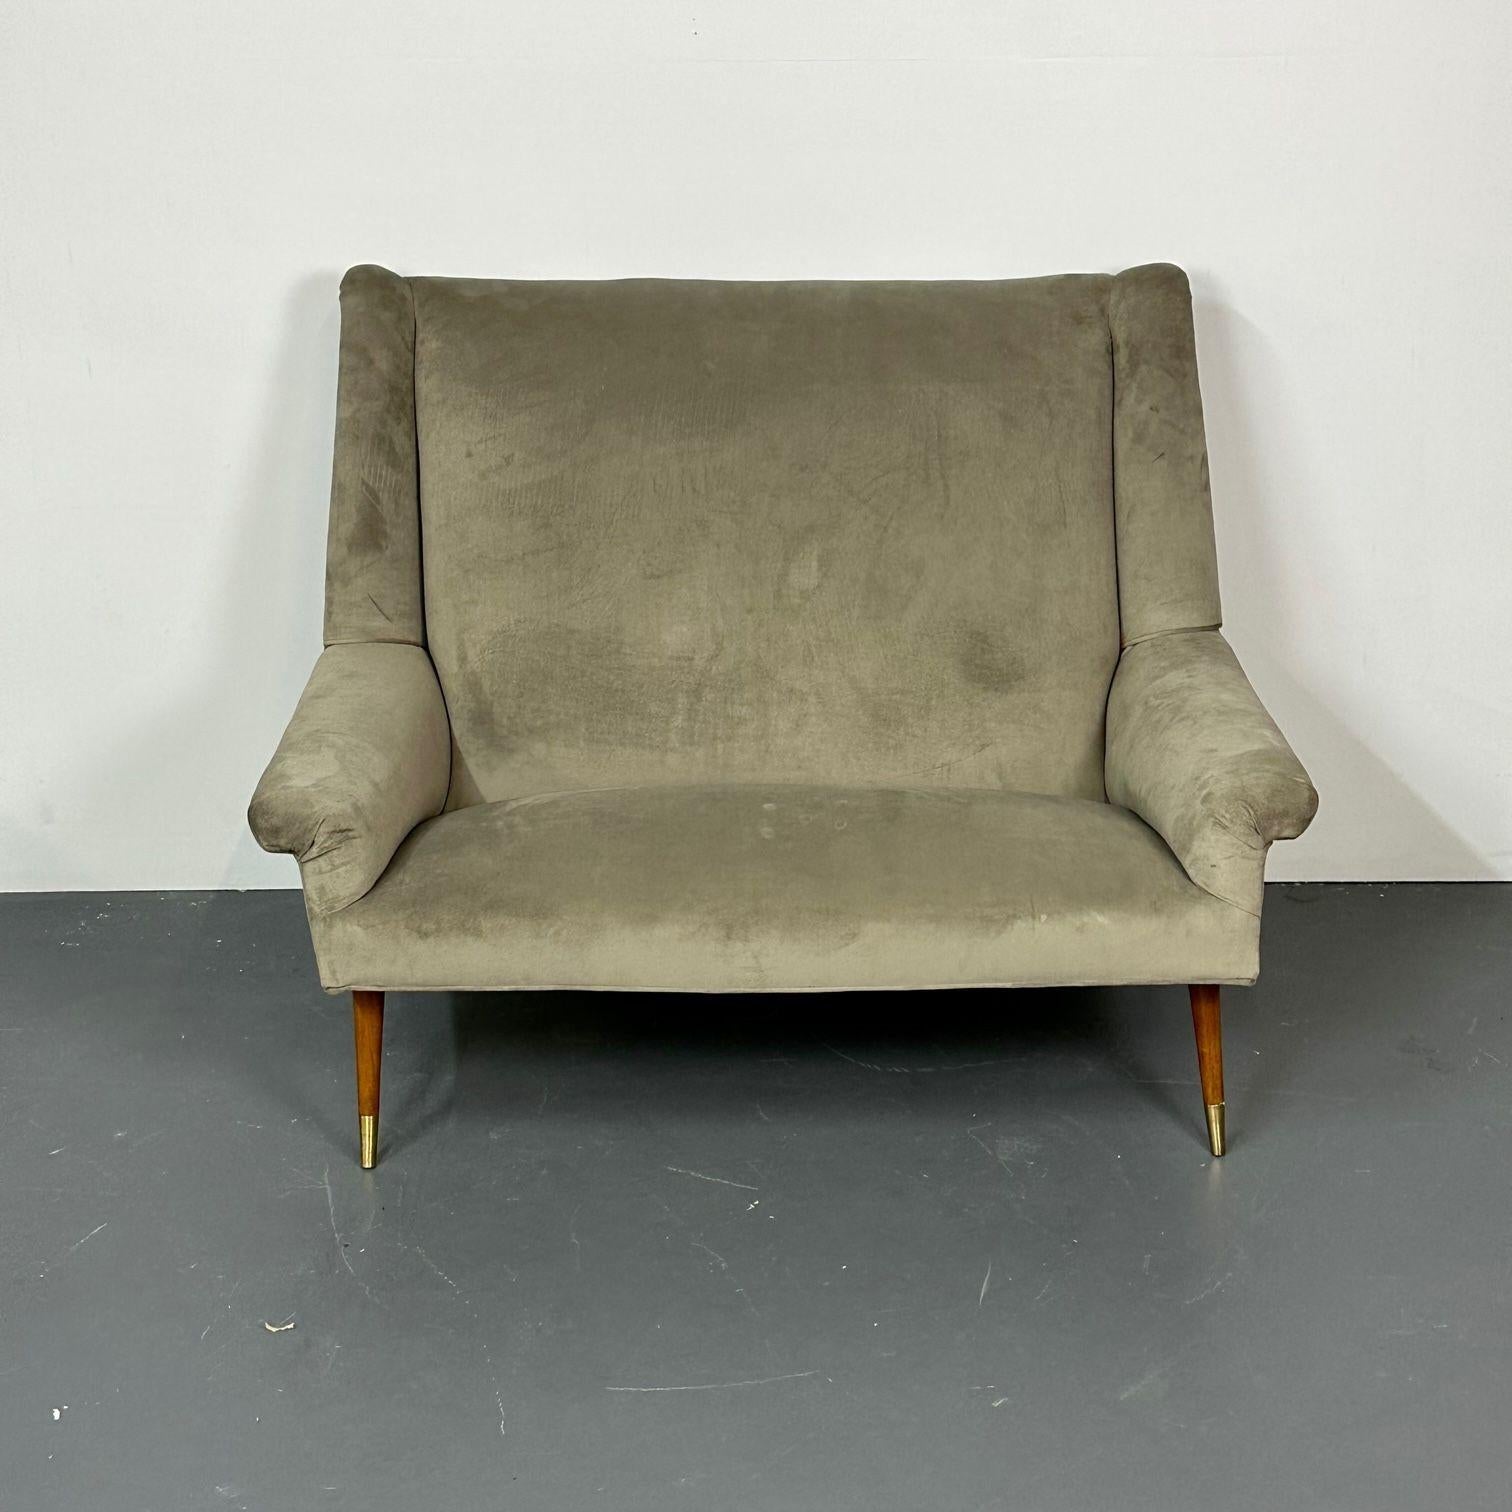 Italian Mid-Century Modern Gio Ponti Style Unsigned sofa / settee, velvet, Walnut, 1950s

Handsome two seater Italian small sofa or settee of the mid-century period. Having curved walnut legs finished with a light polish and brass sabots on all